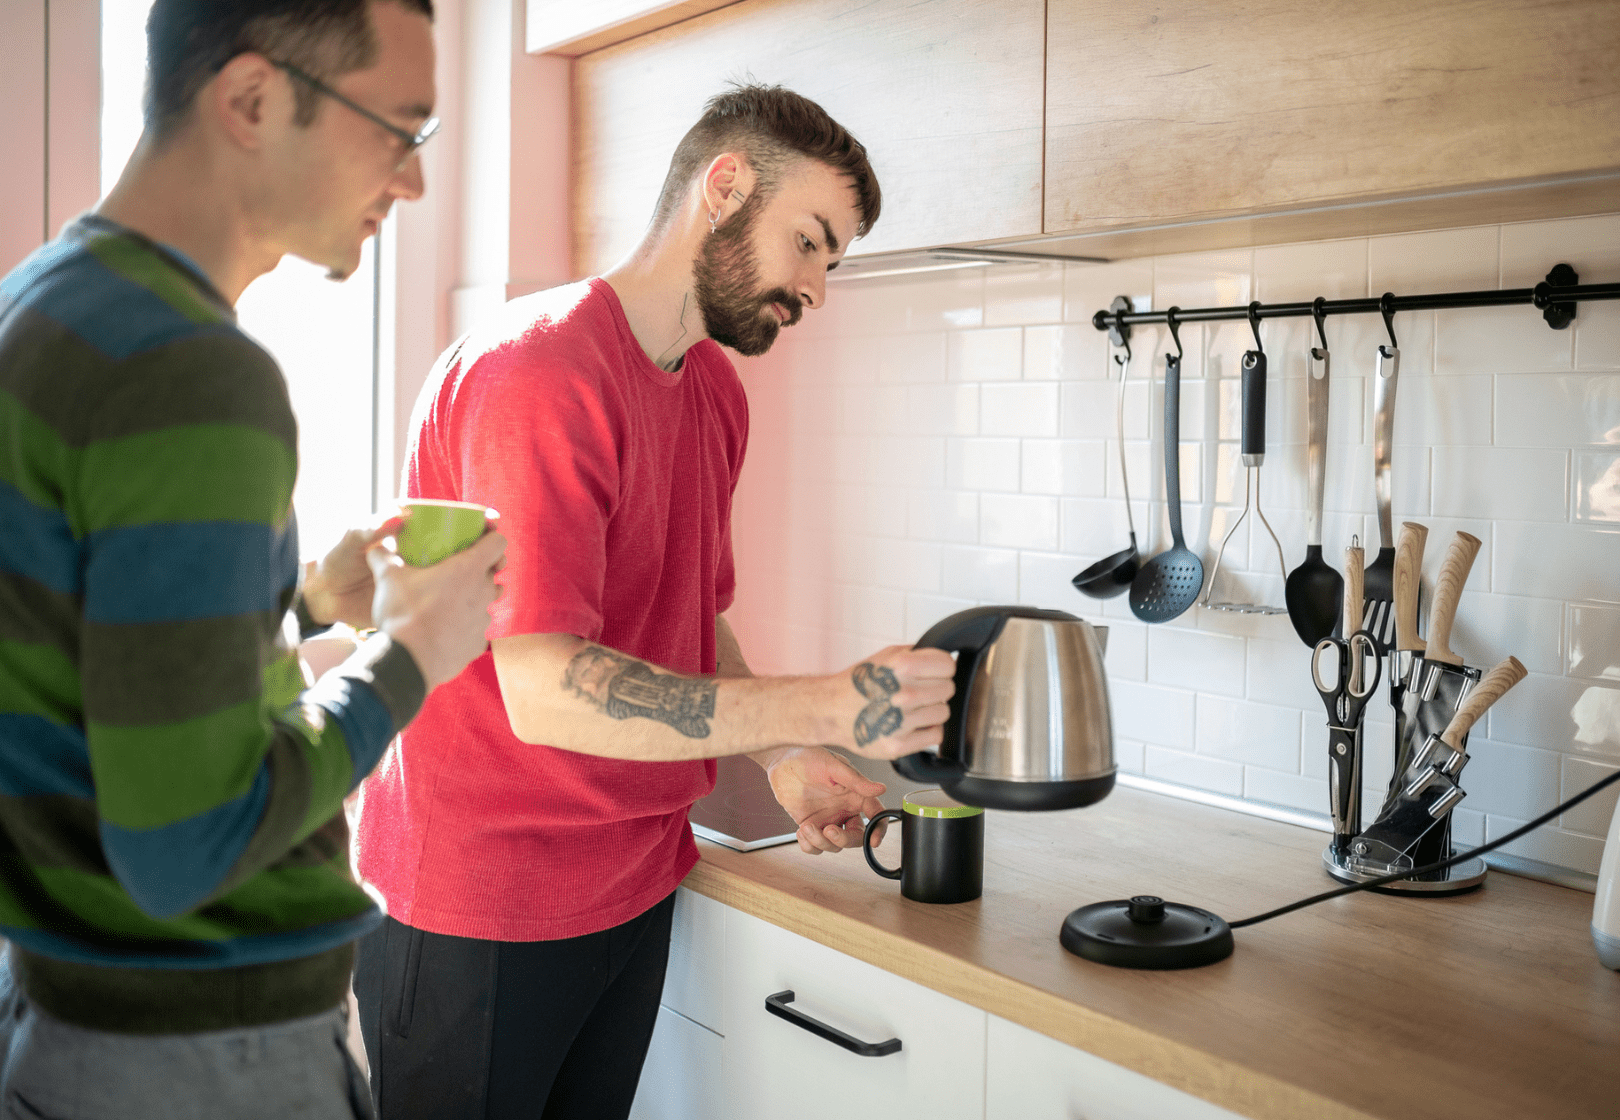 Two men in the kitchen with a kettle